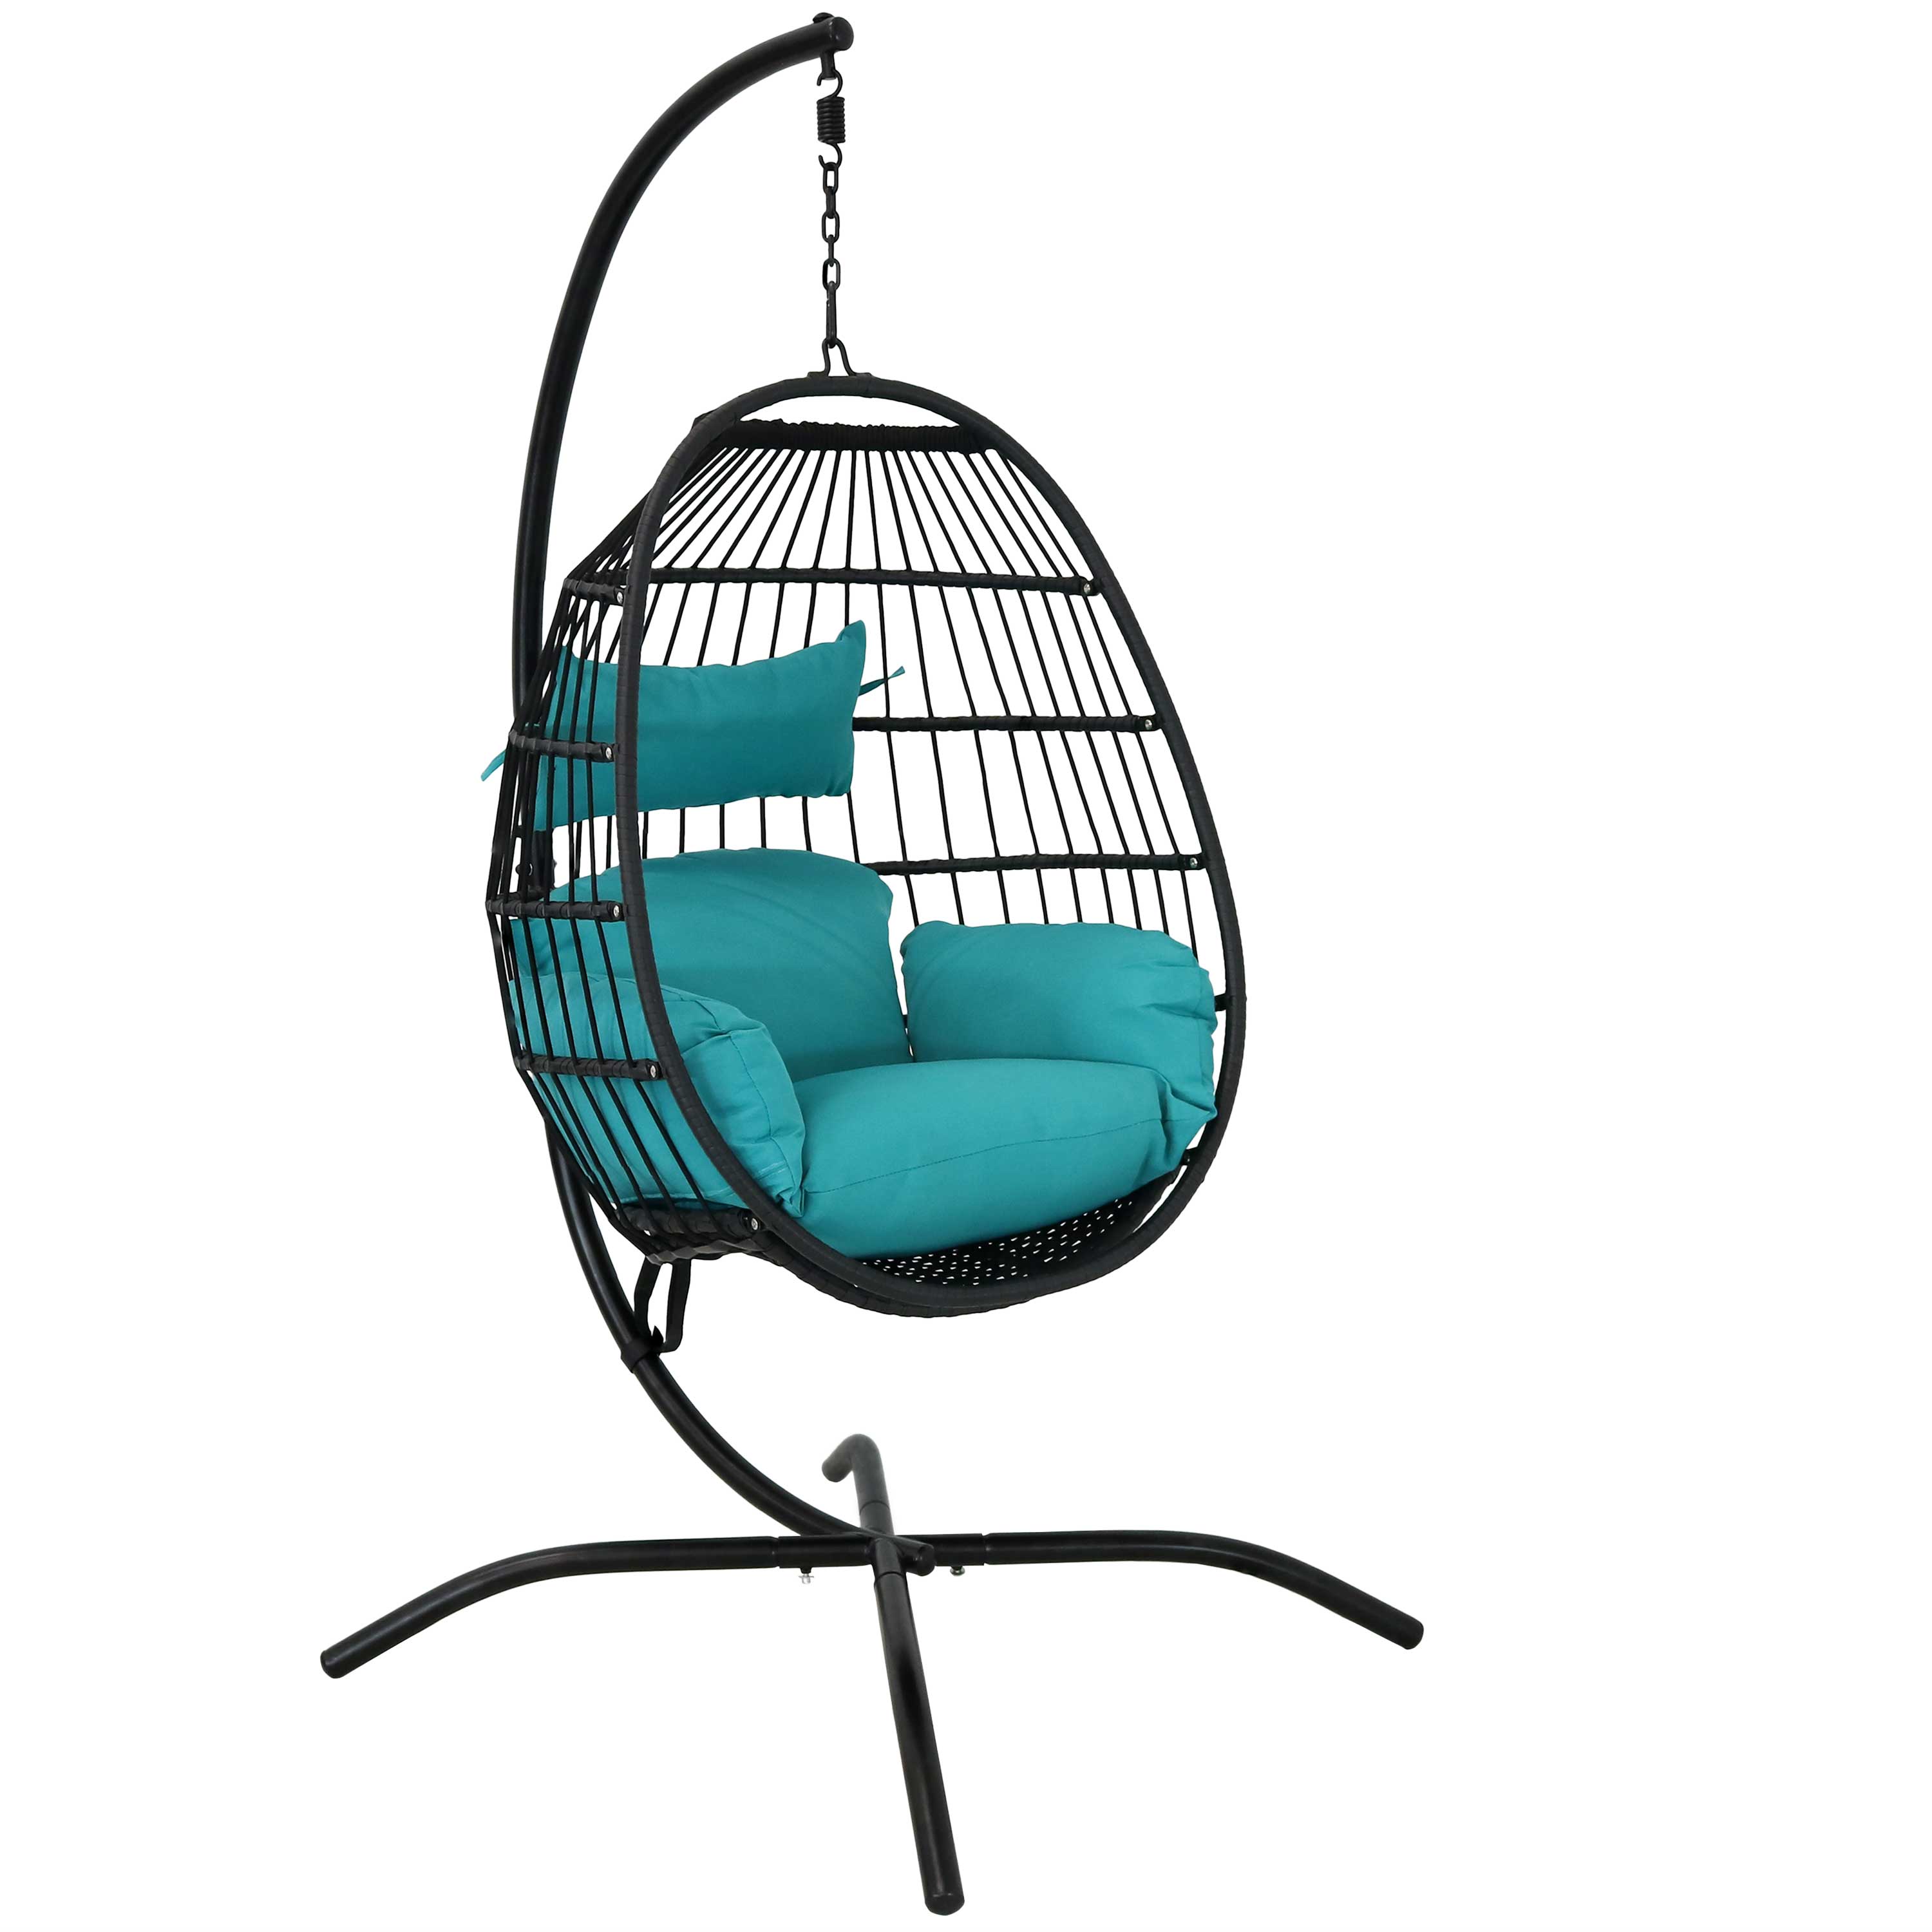 Sunnydaze Dalia Hanging Egg Chair with Seat Cushions and Stand - 81-Inch